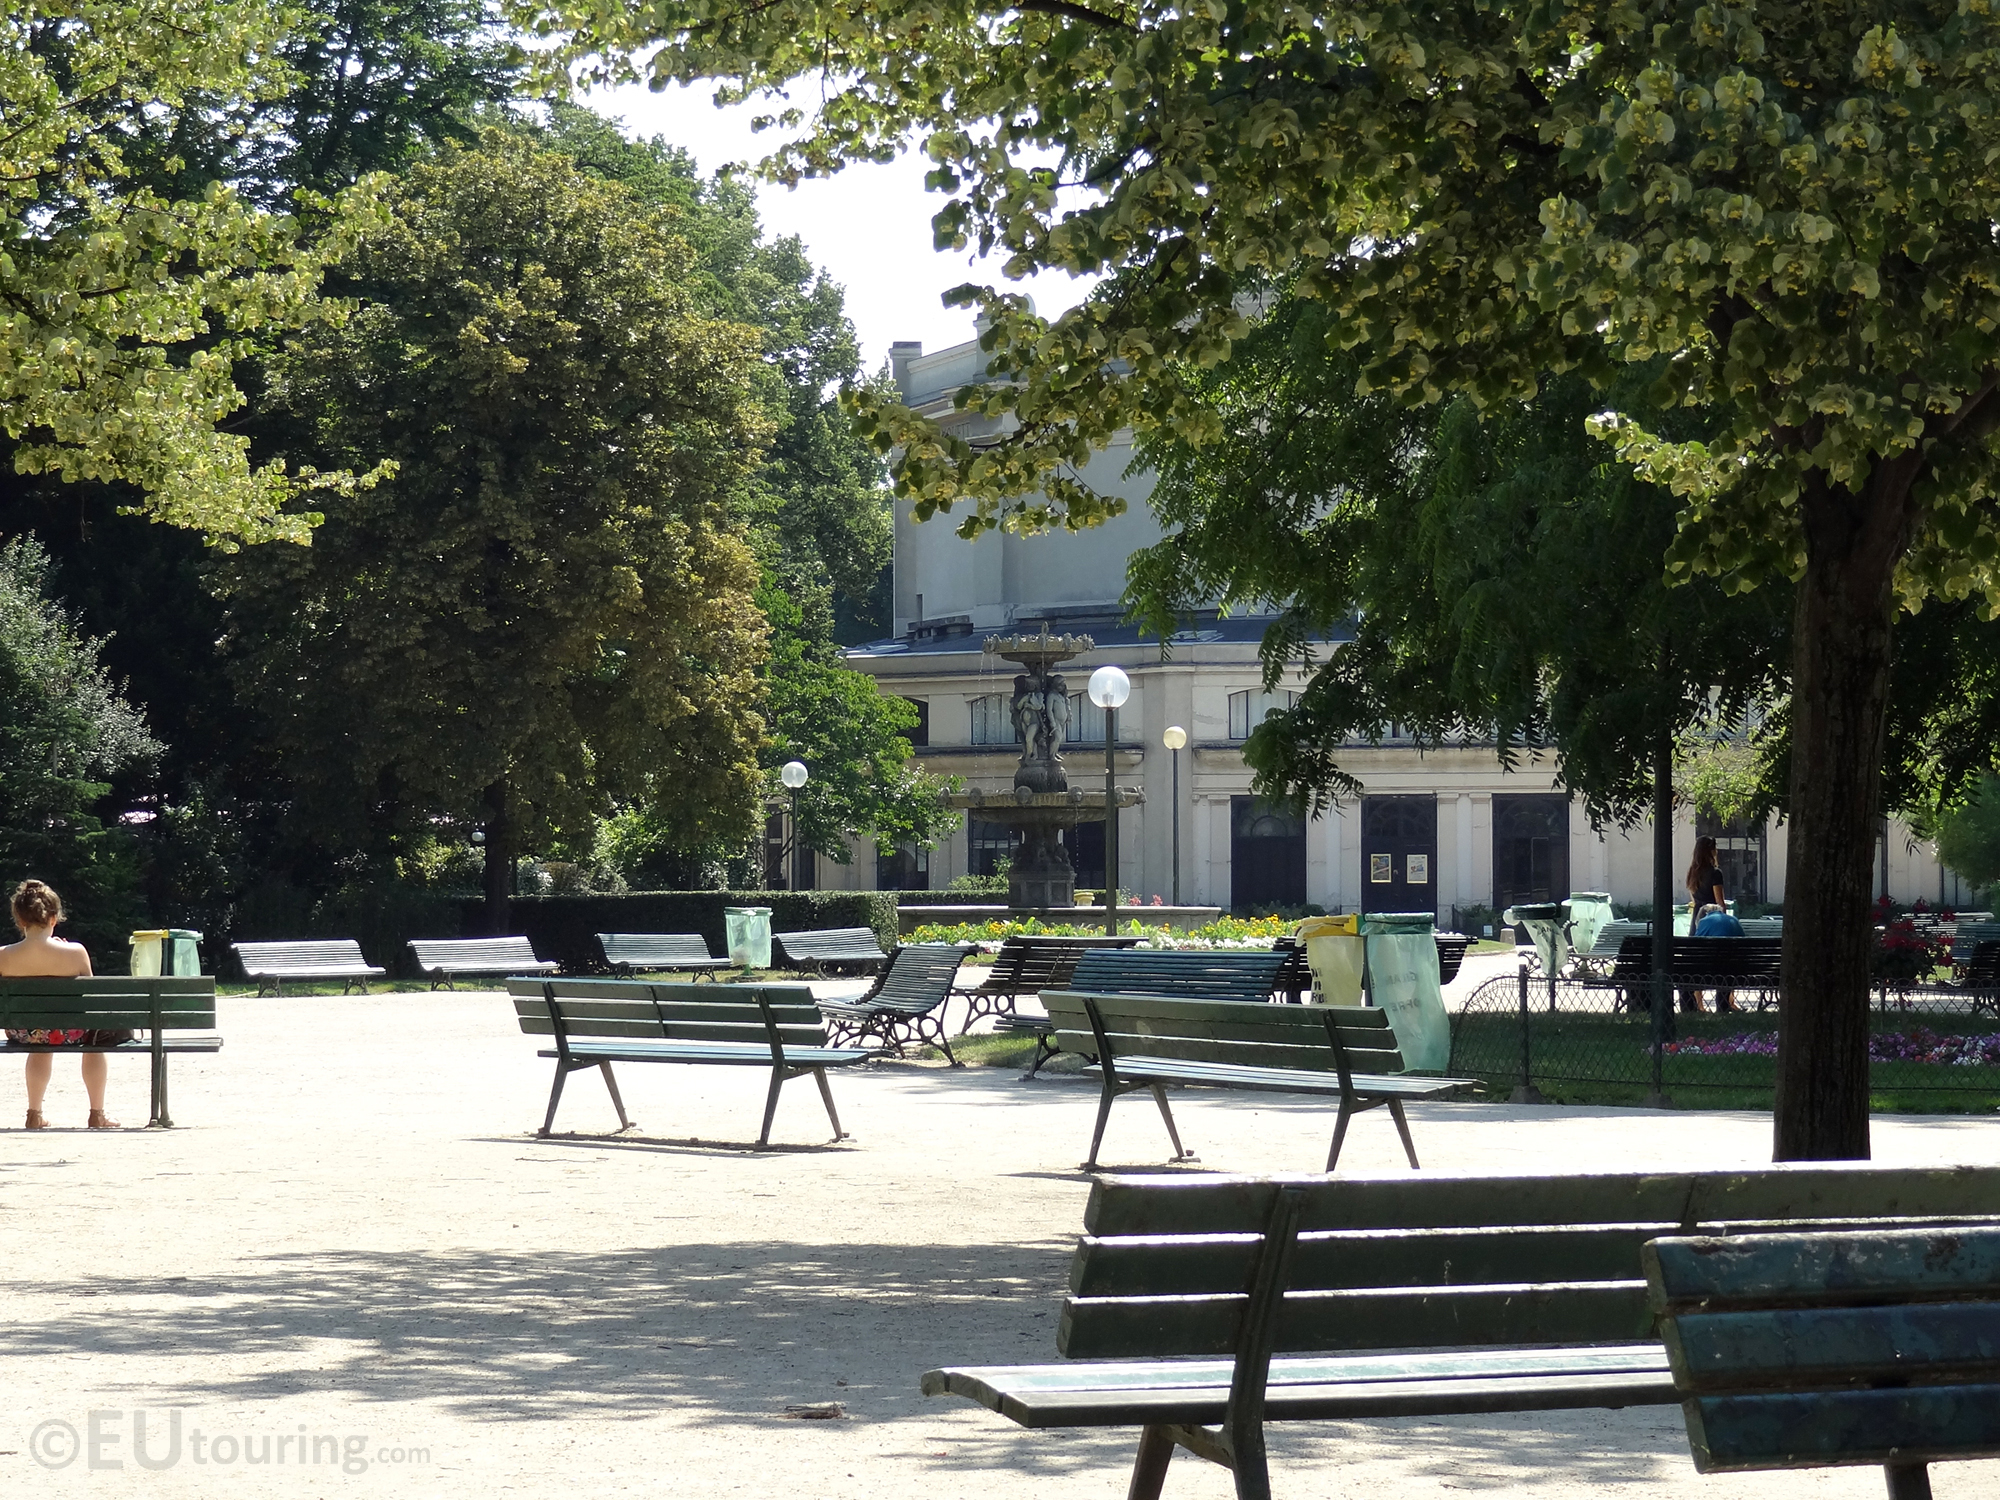 Many benches within the gardens